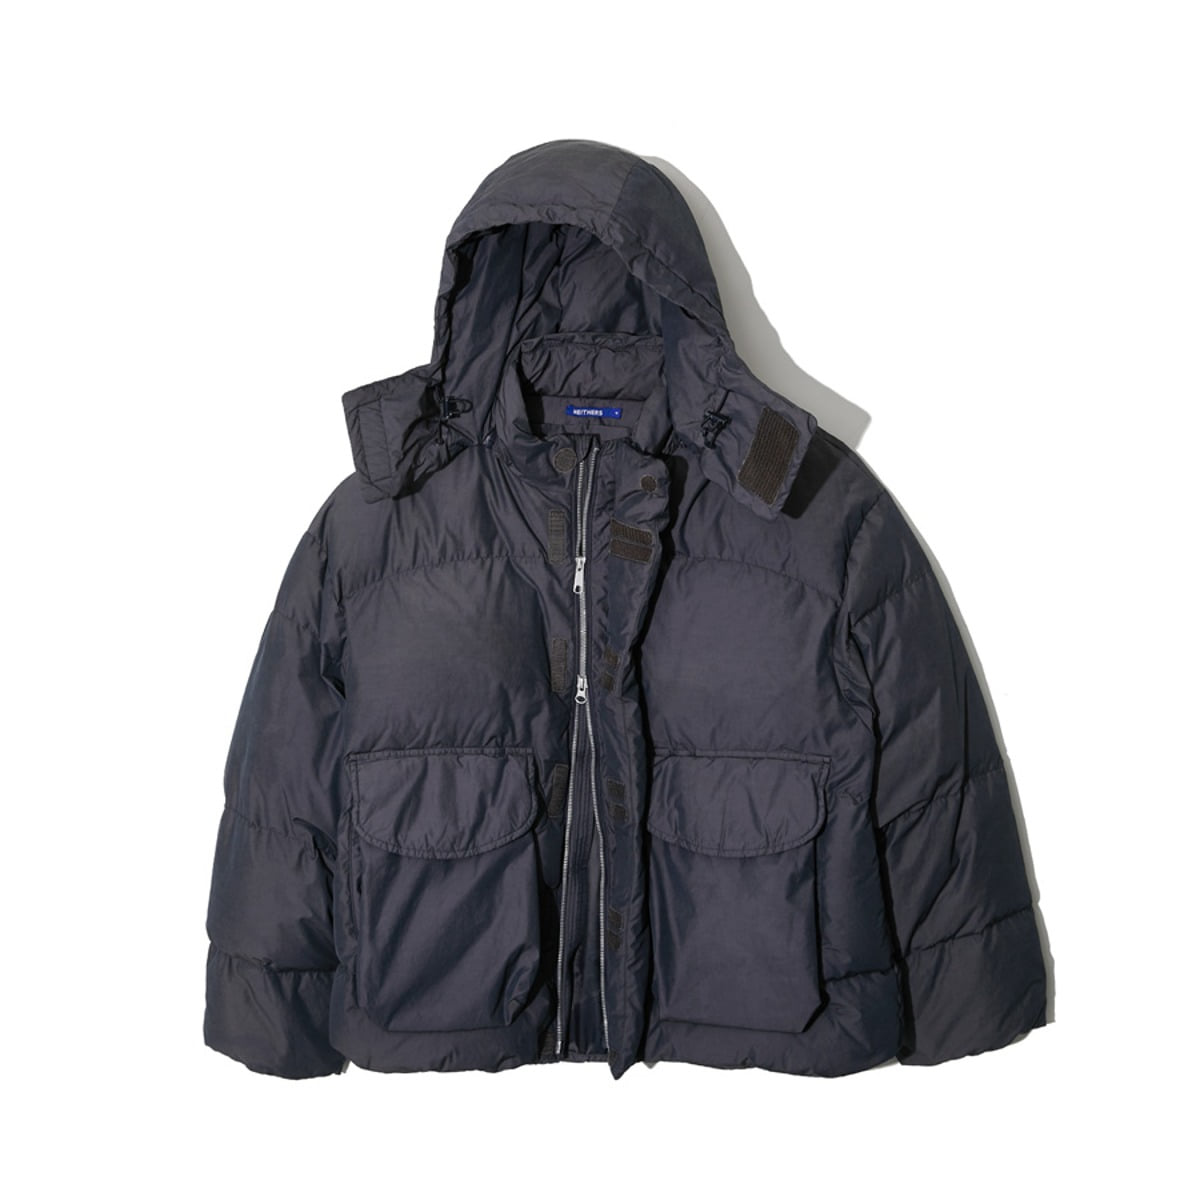 DISCOLORED GOOSE DOWN DETACHABLE HOODED JACKET (NAVY)